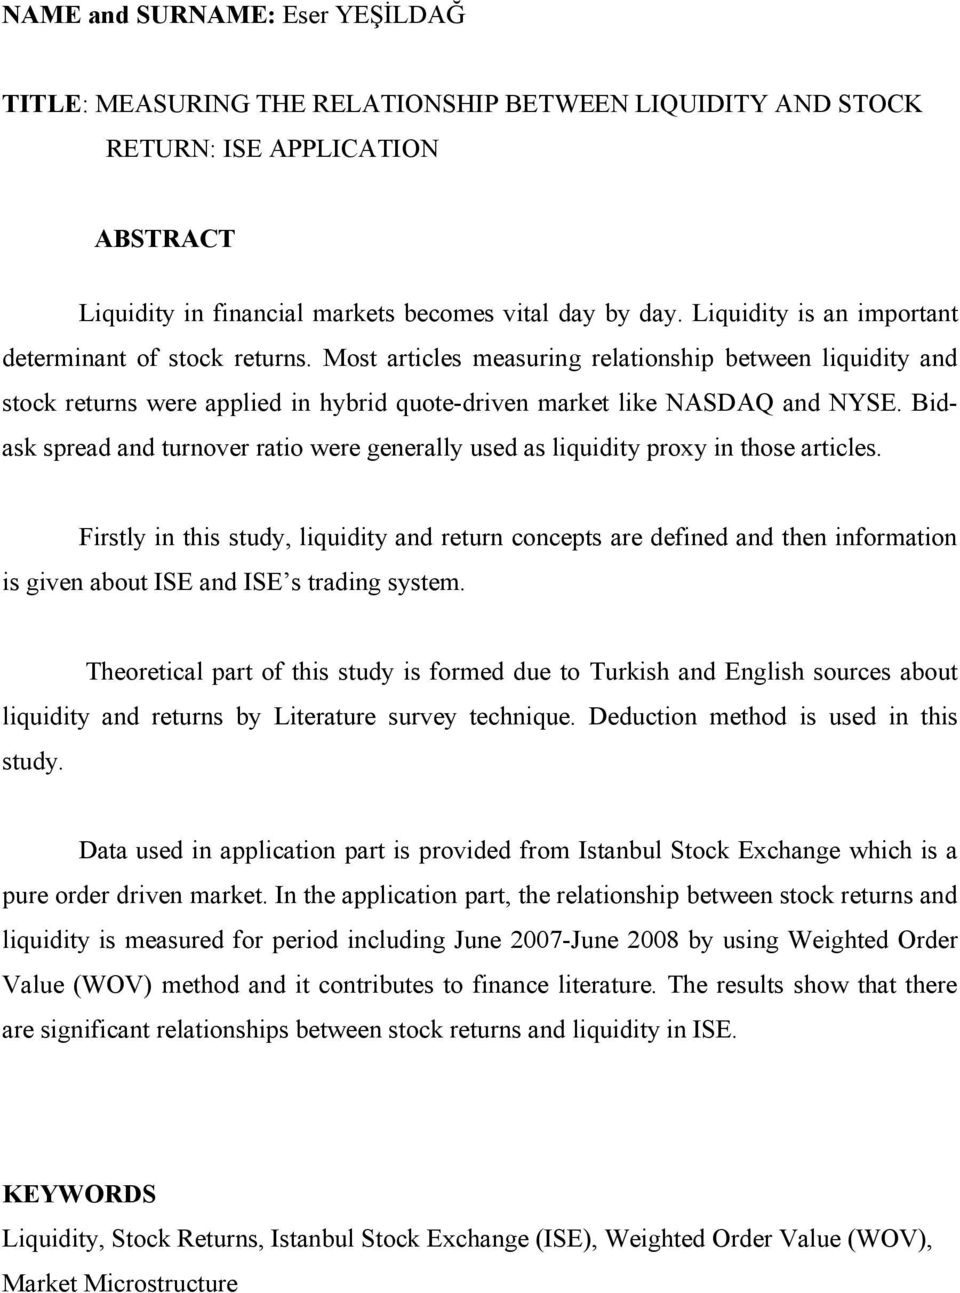 Bidask spread and turnover ratio were generally used as liquidity proxy in those articles.